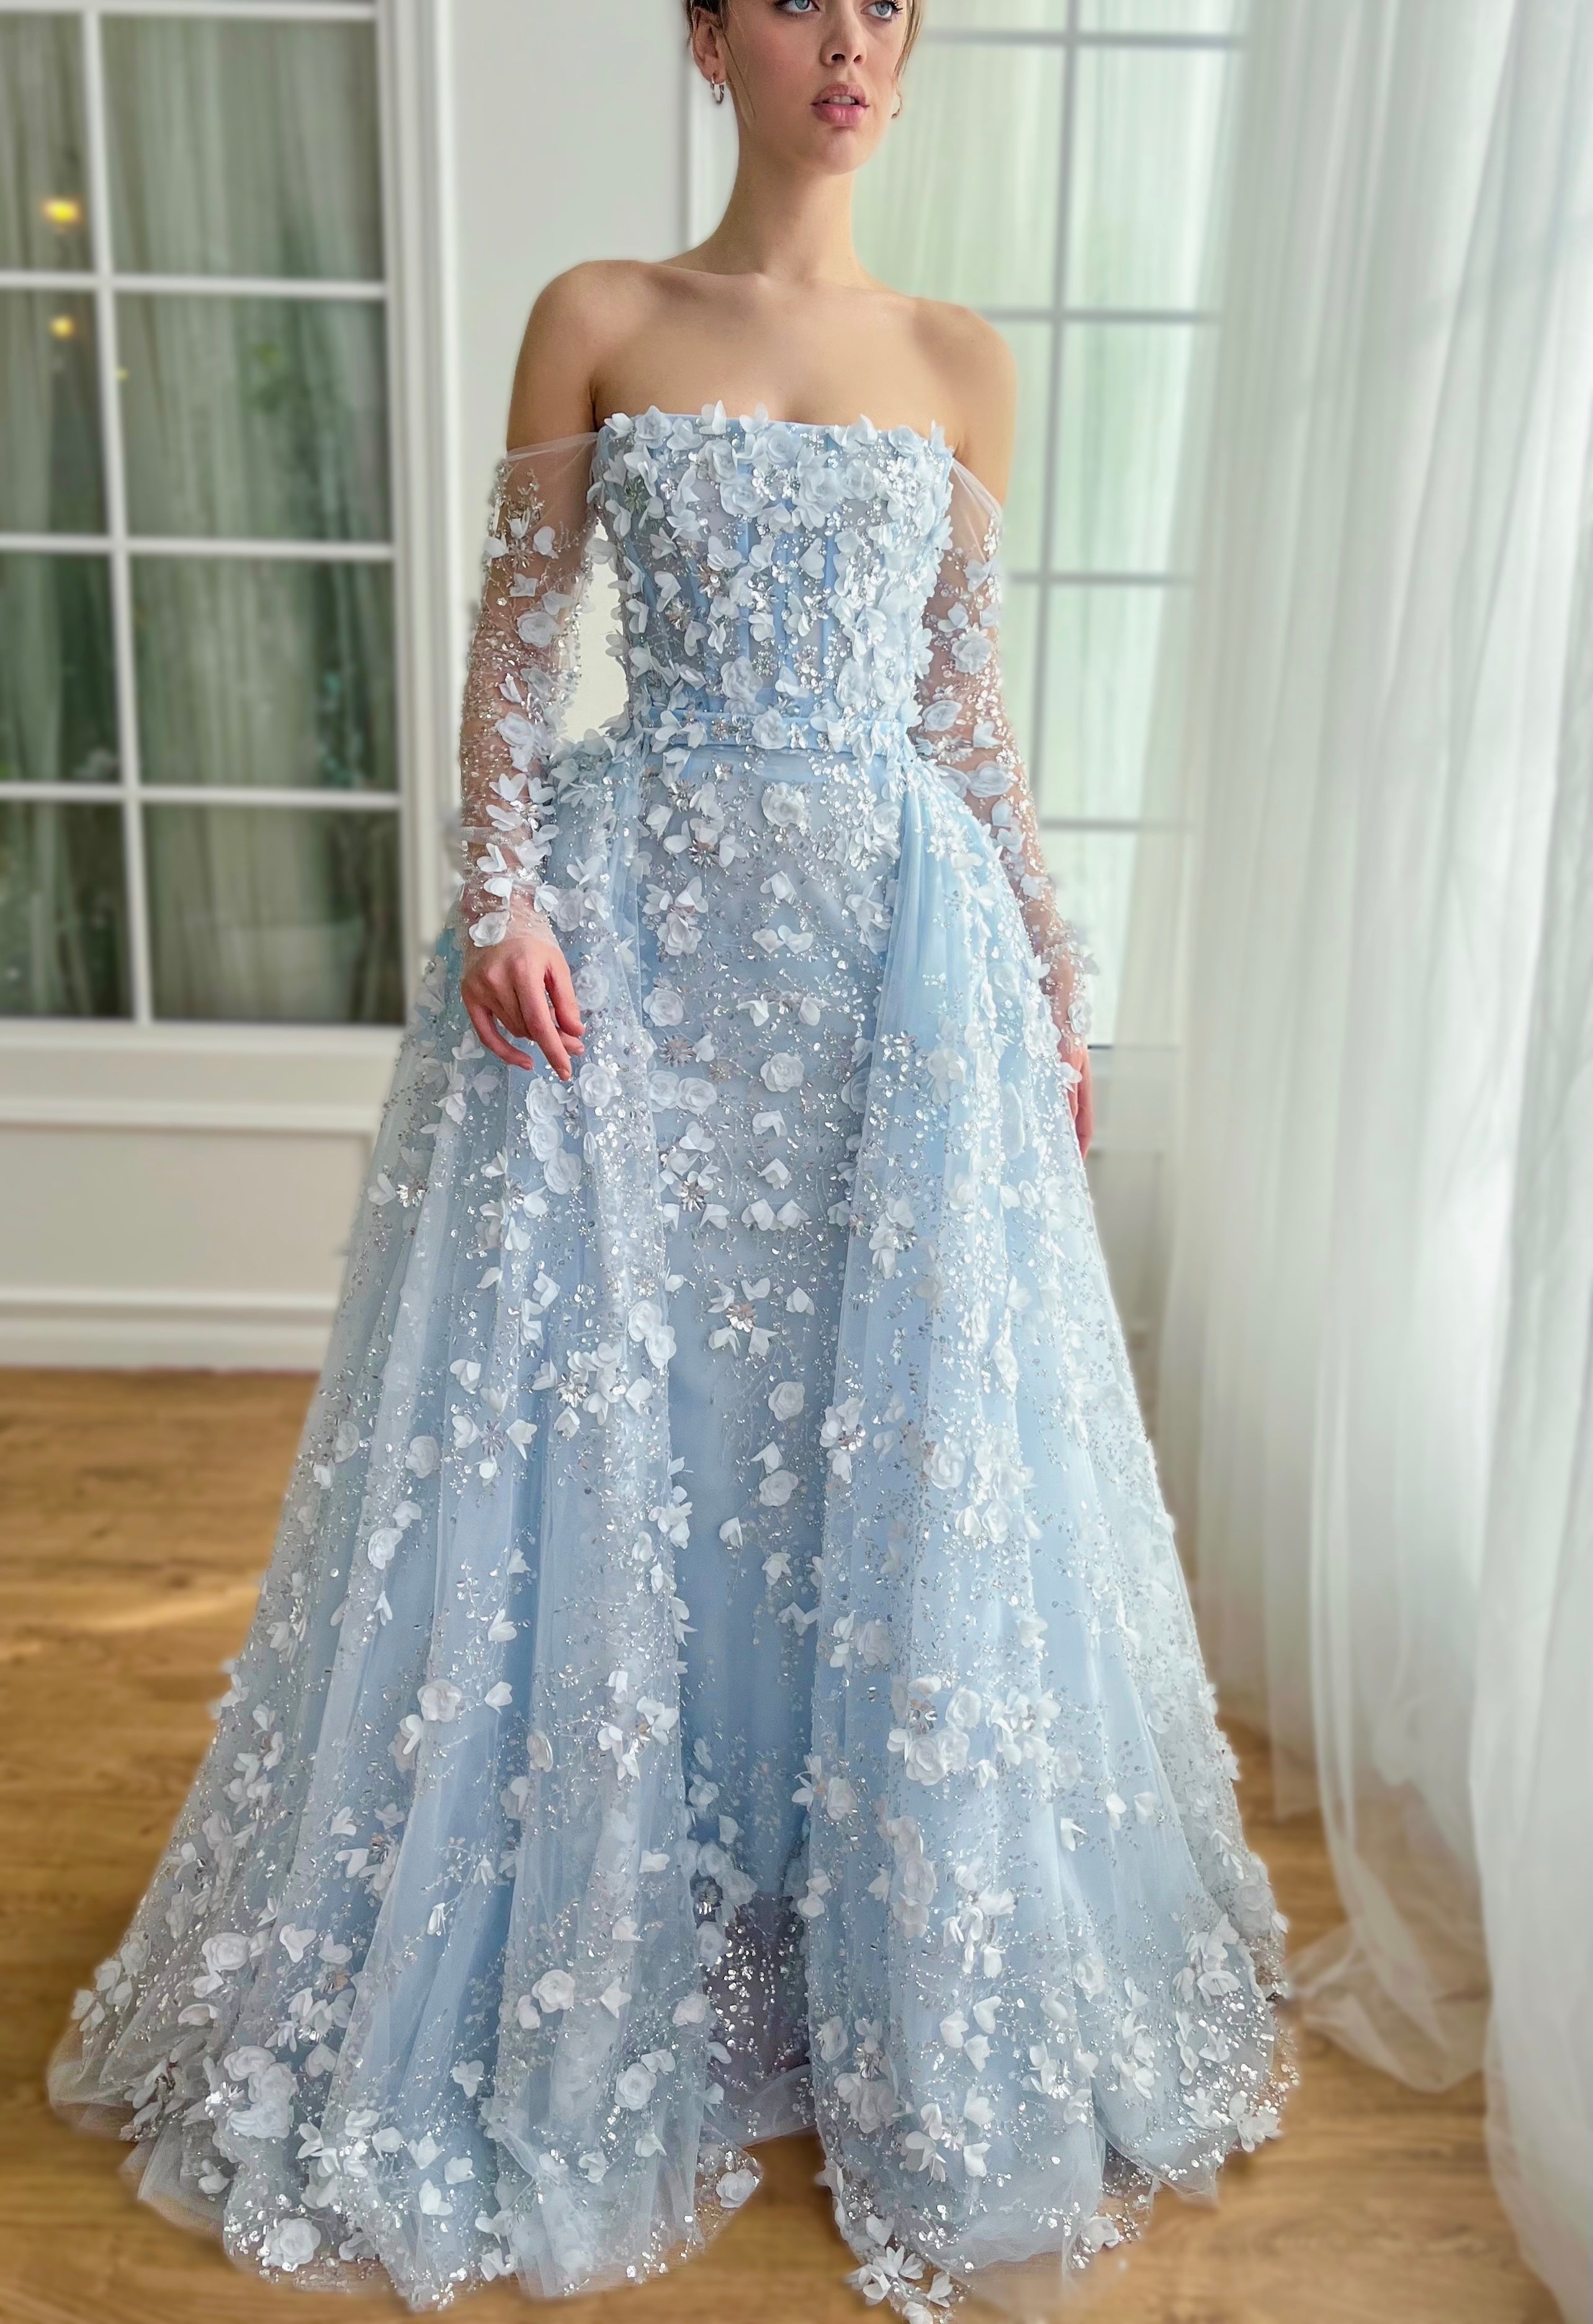 Light blue A-Line dress with long off the shoulder sleeves, overskirt and embroidery